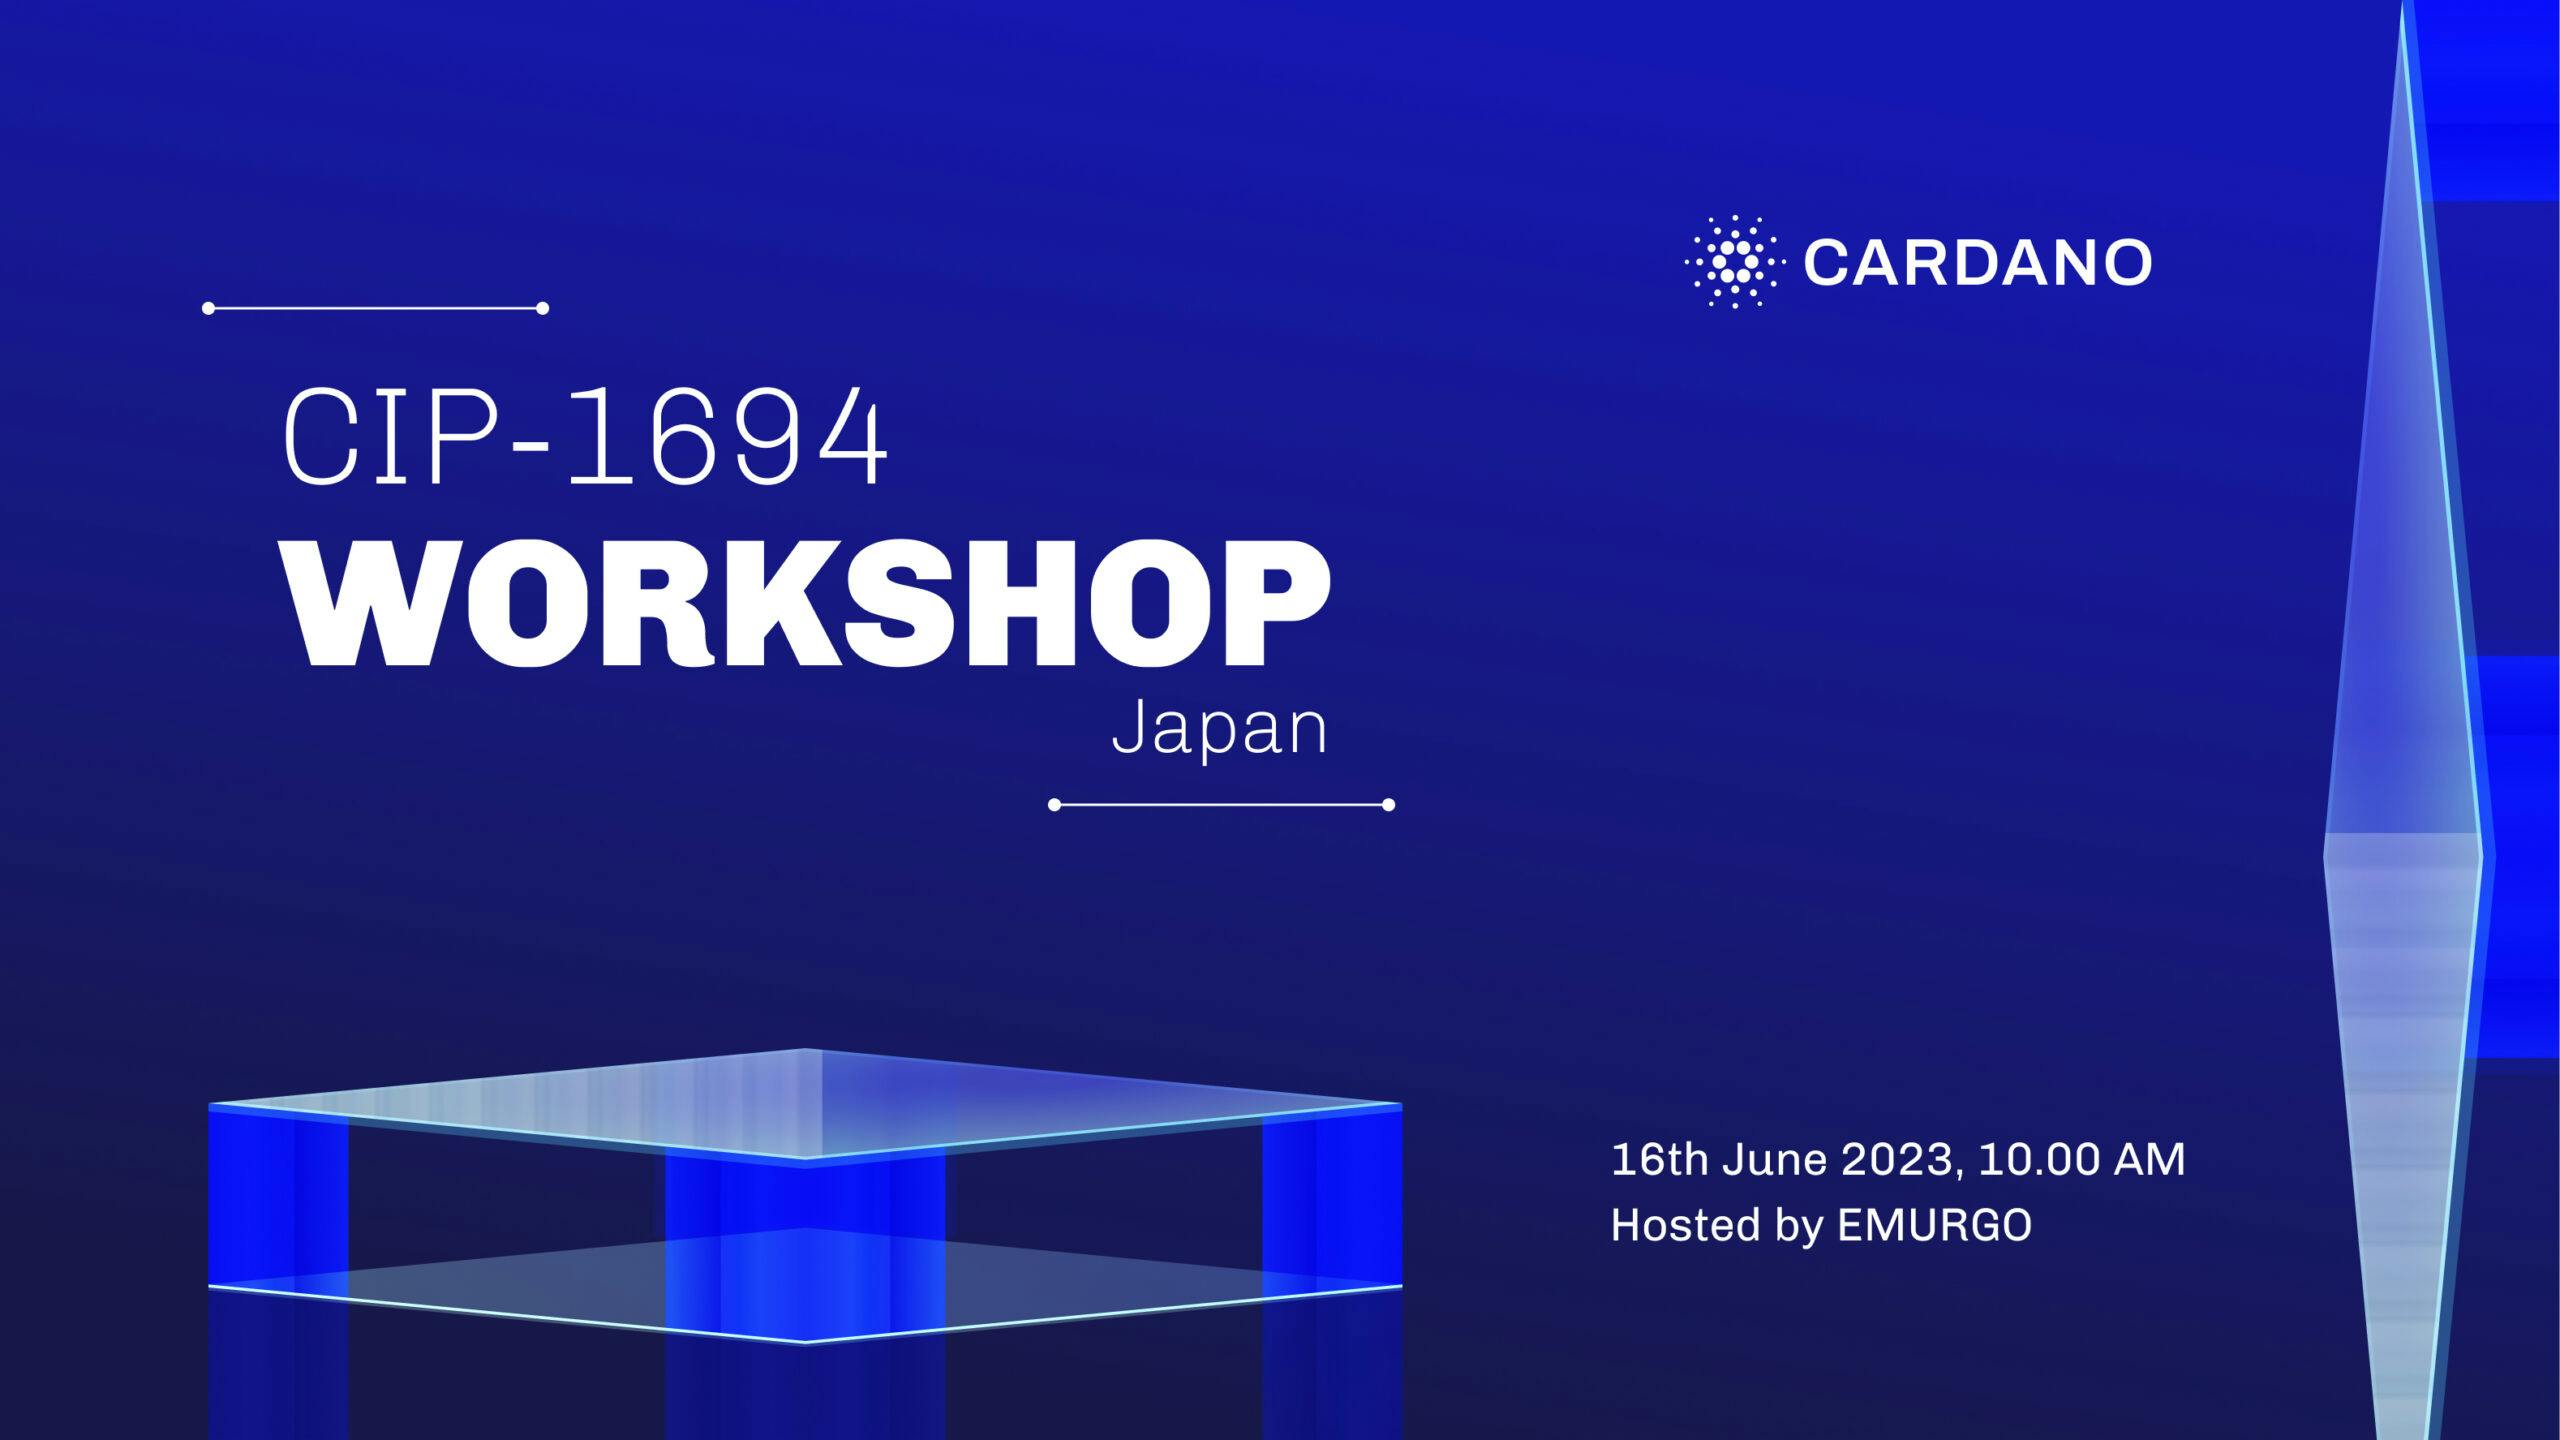 Create-event-banner-email-banner-for-CIP-1694-workshop-in-Japan-scaled-1.jpg